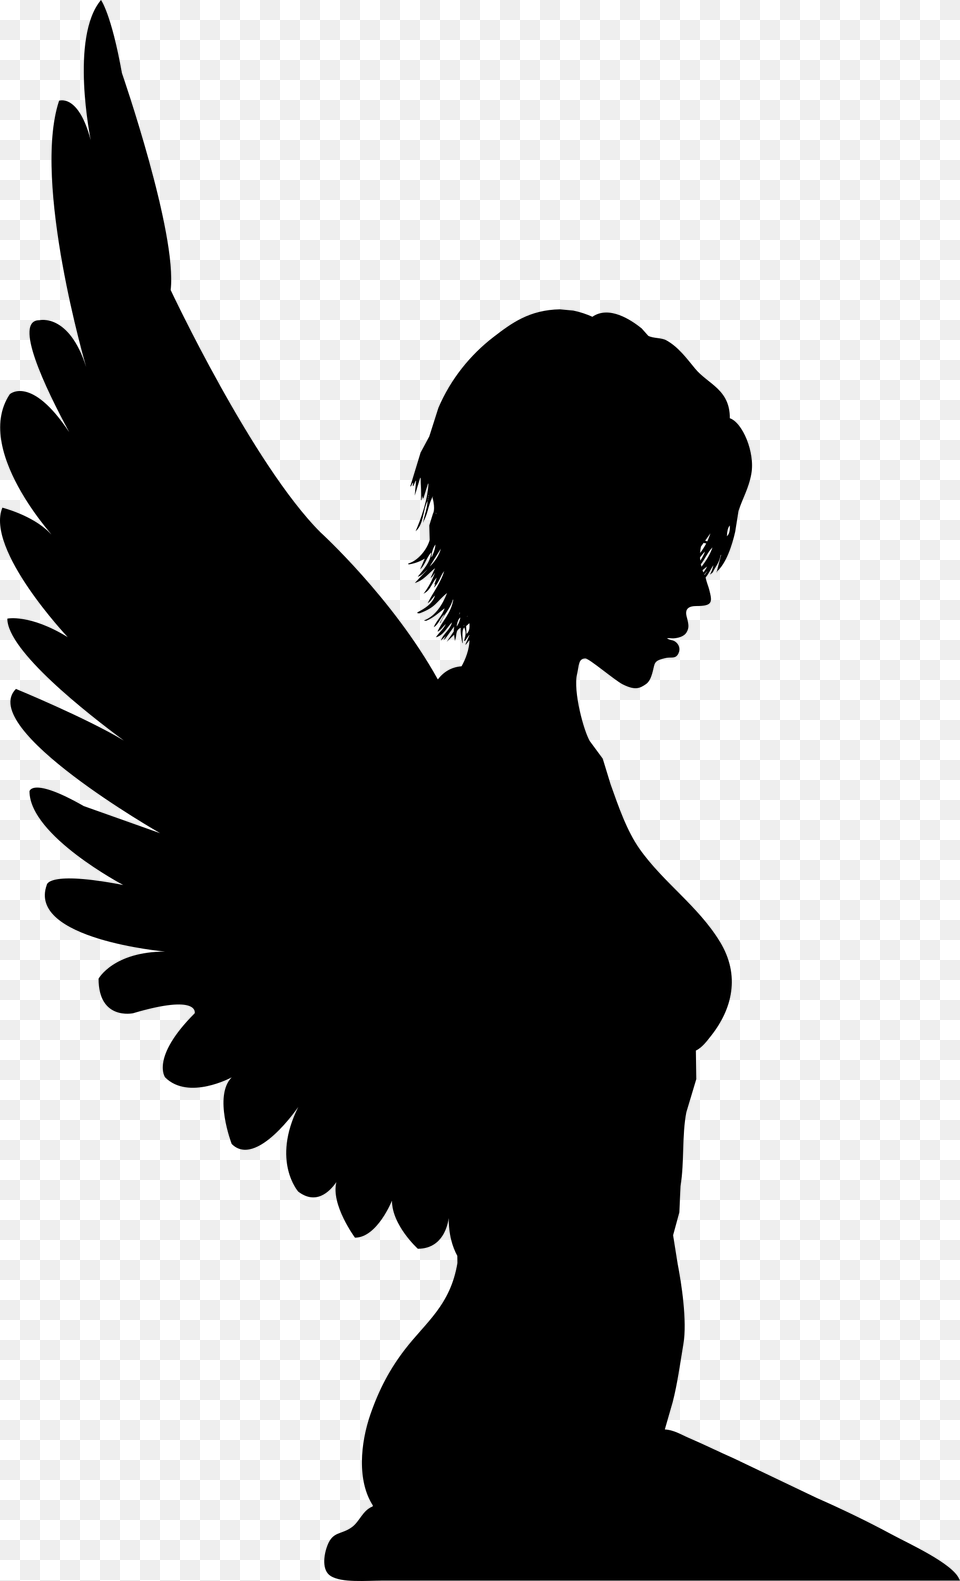 Woman With Wings Silhouette Silhouette Of Woman With Wings, Gray Free Png